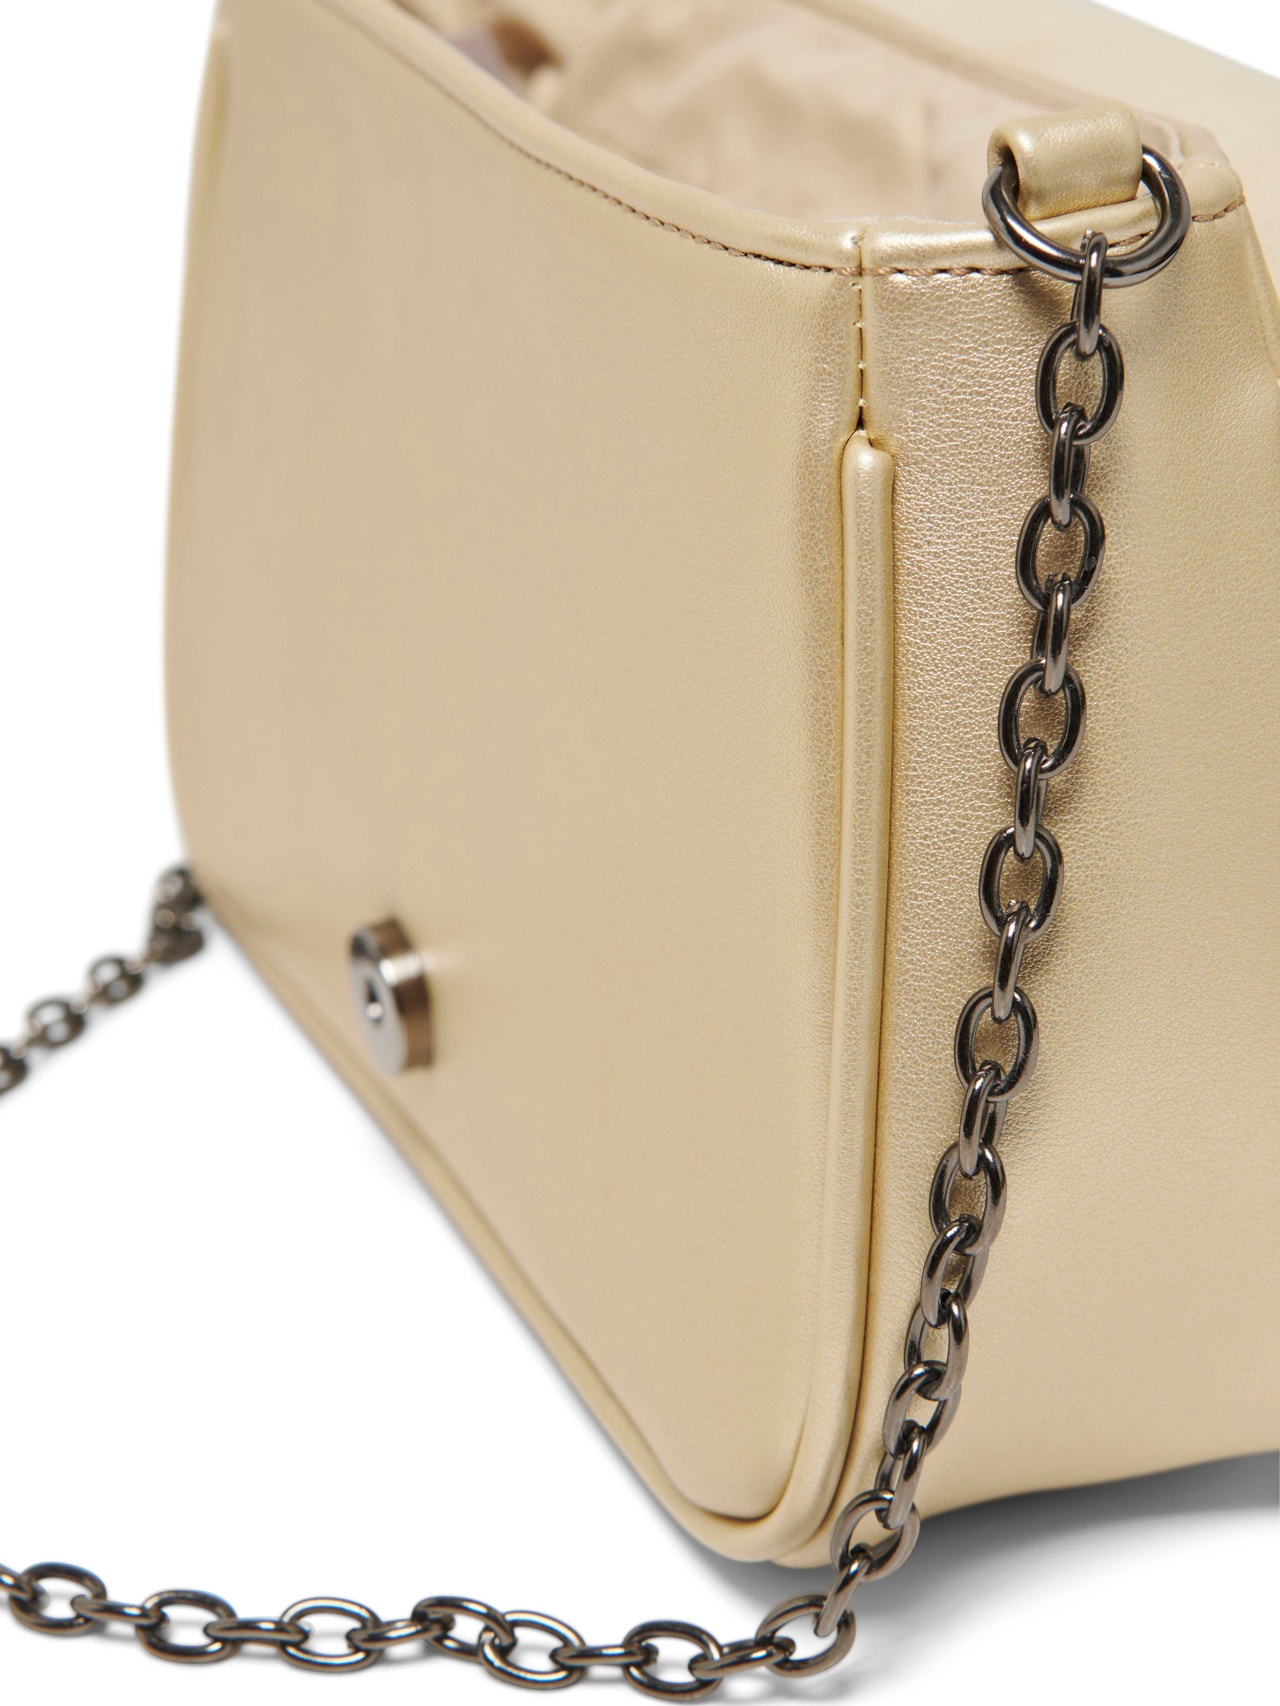 ONLY Bag with chain strap -Gold Colour - 15300843